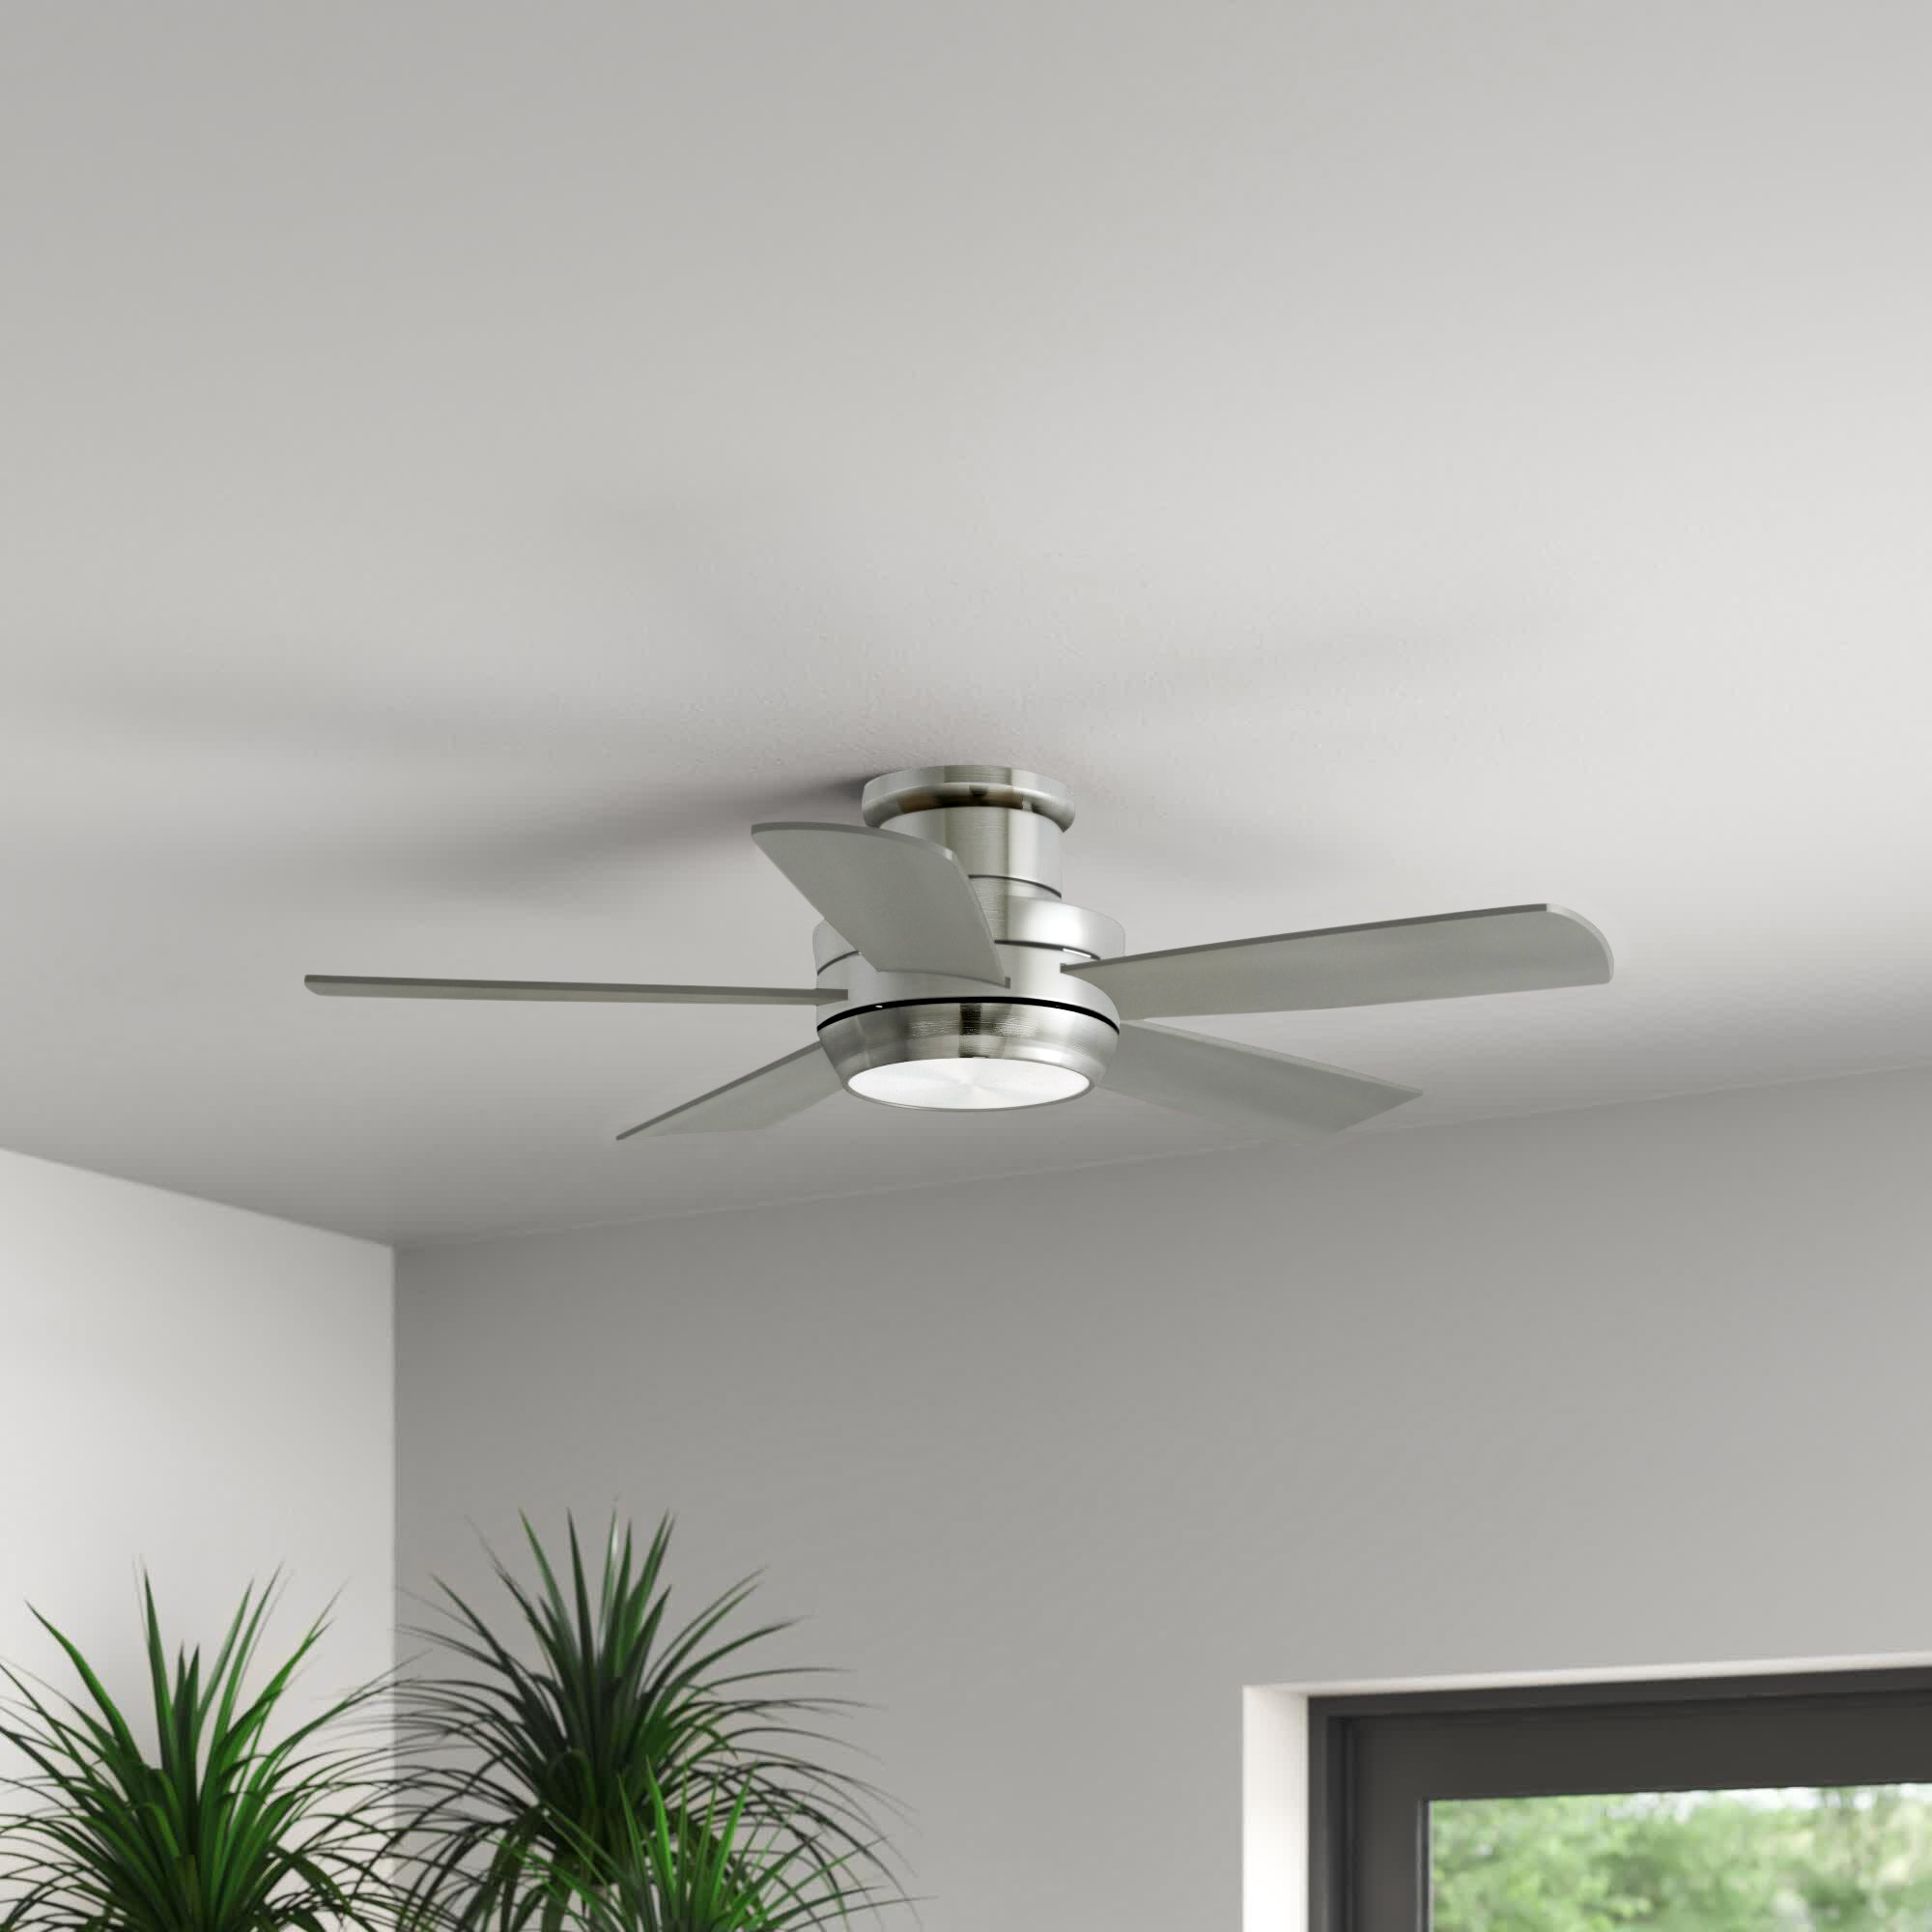 Details about  / Ceiling Fan with Lighting and Dimmable Remote Control Wind Speed Modern Lamp US